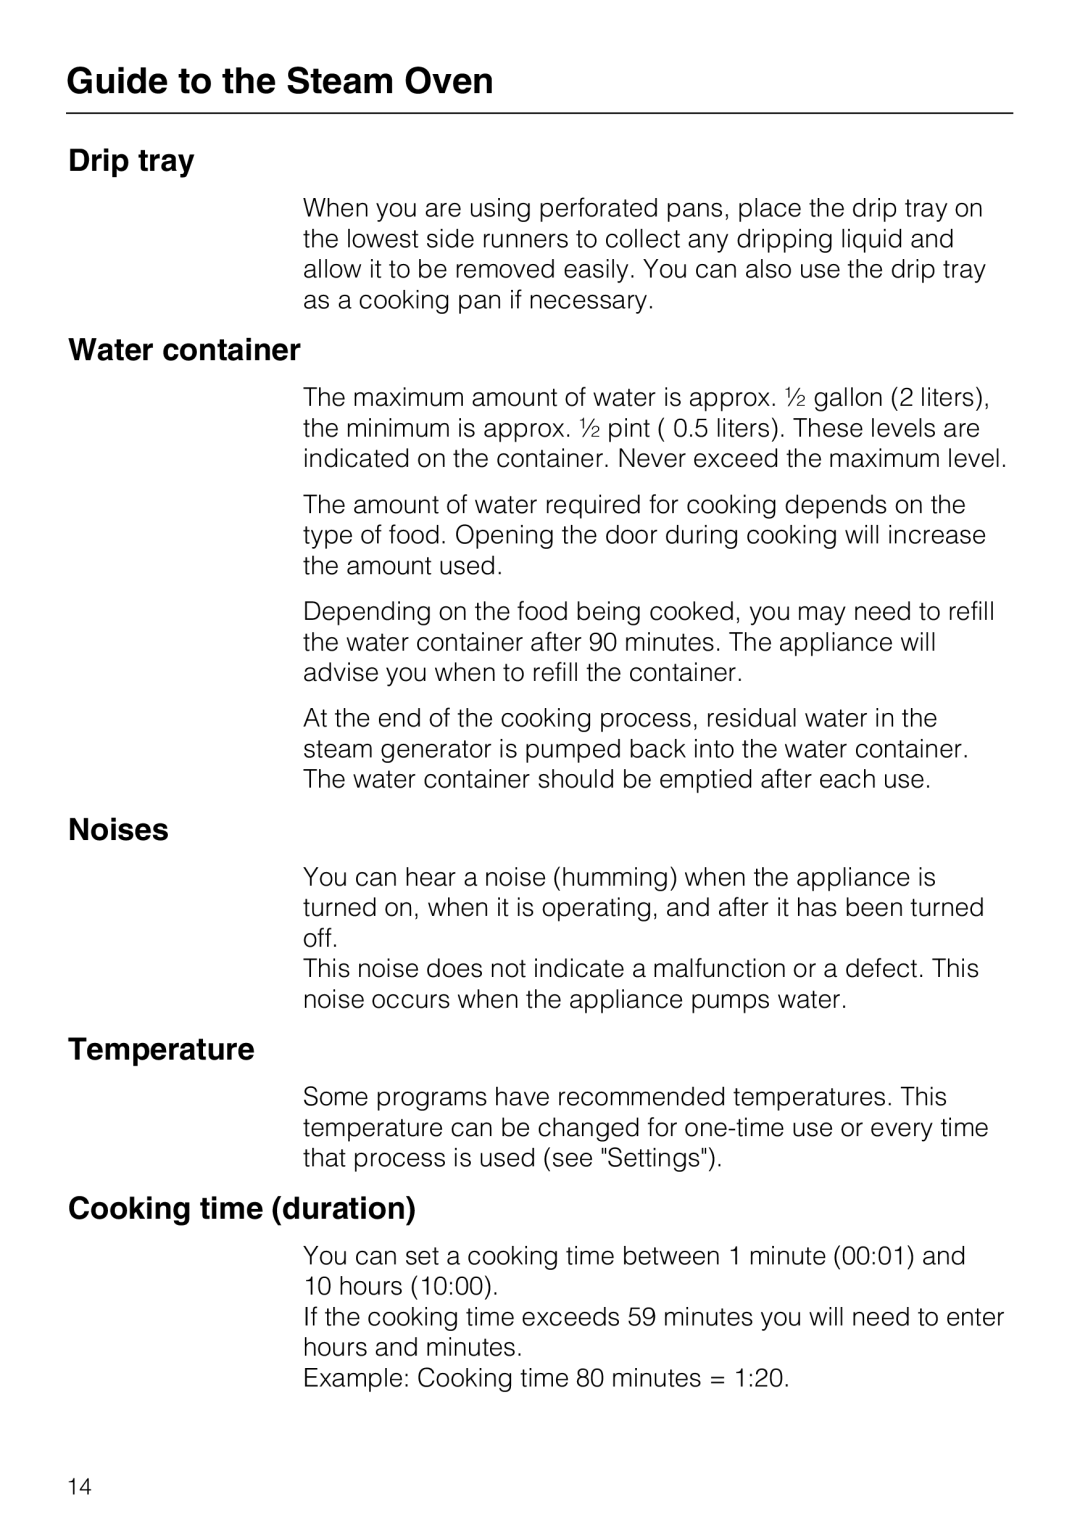 Miele 09 800 830 Drip tray, Water container, Noises, Temperature, Cooking time duration, Guide to the Steam Oven 